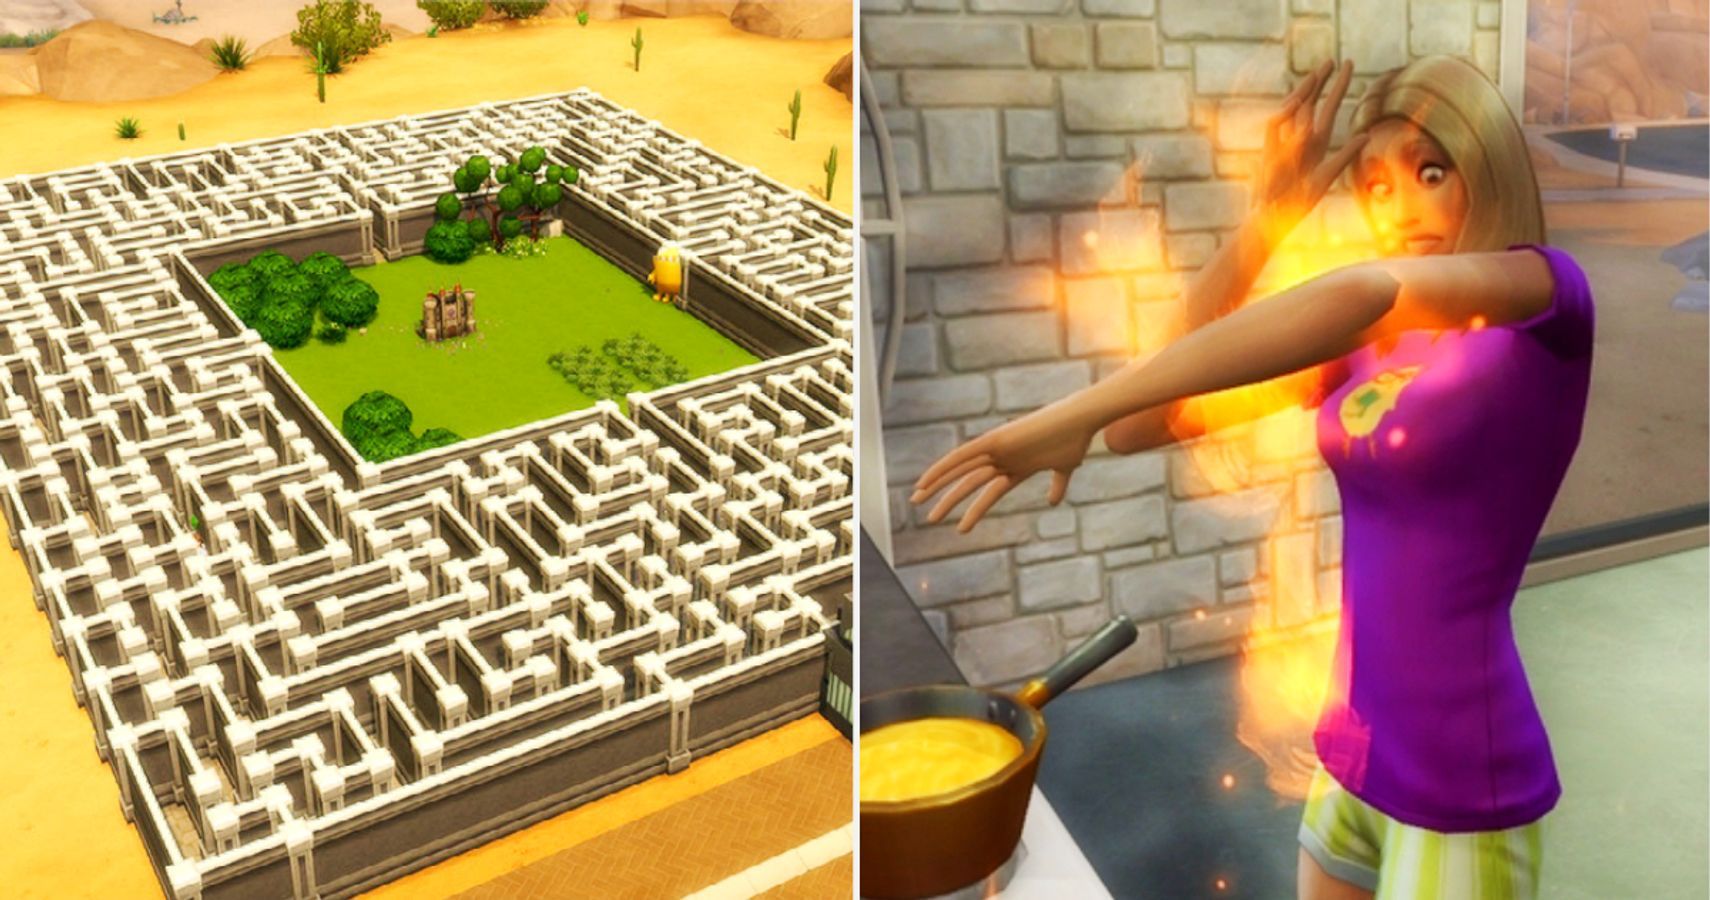 The Sims 4 fence maze and Sims caught on fire